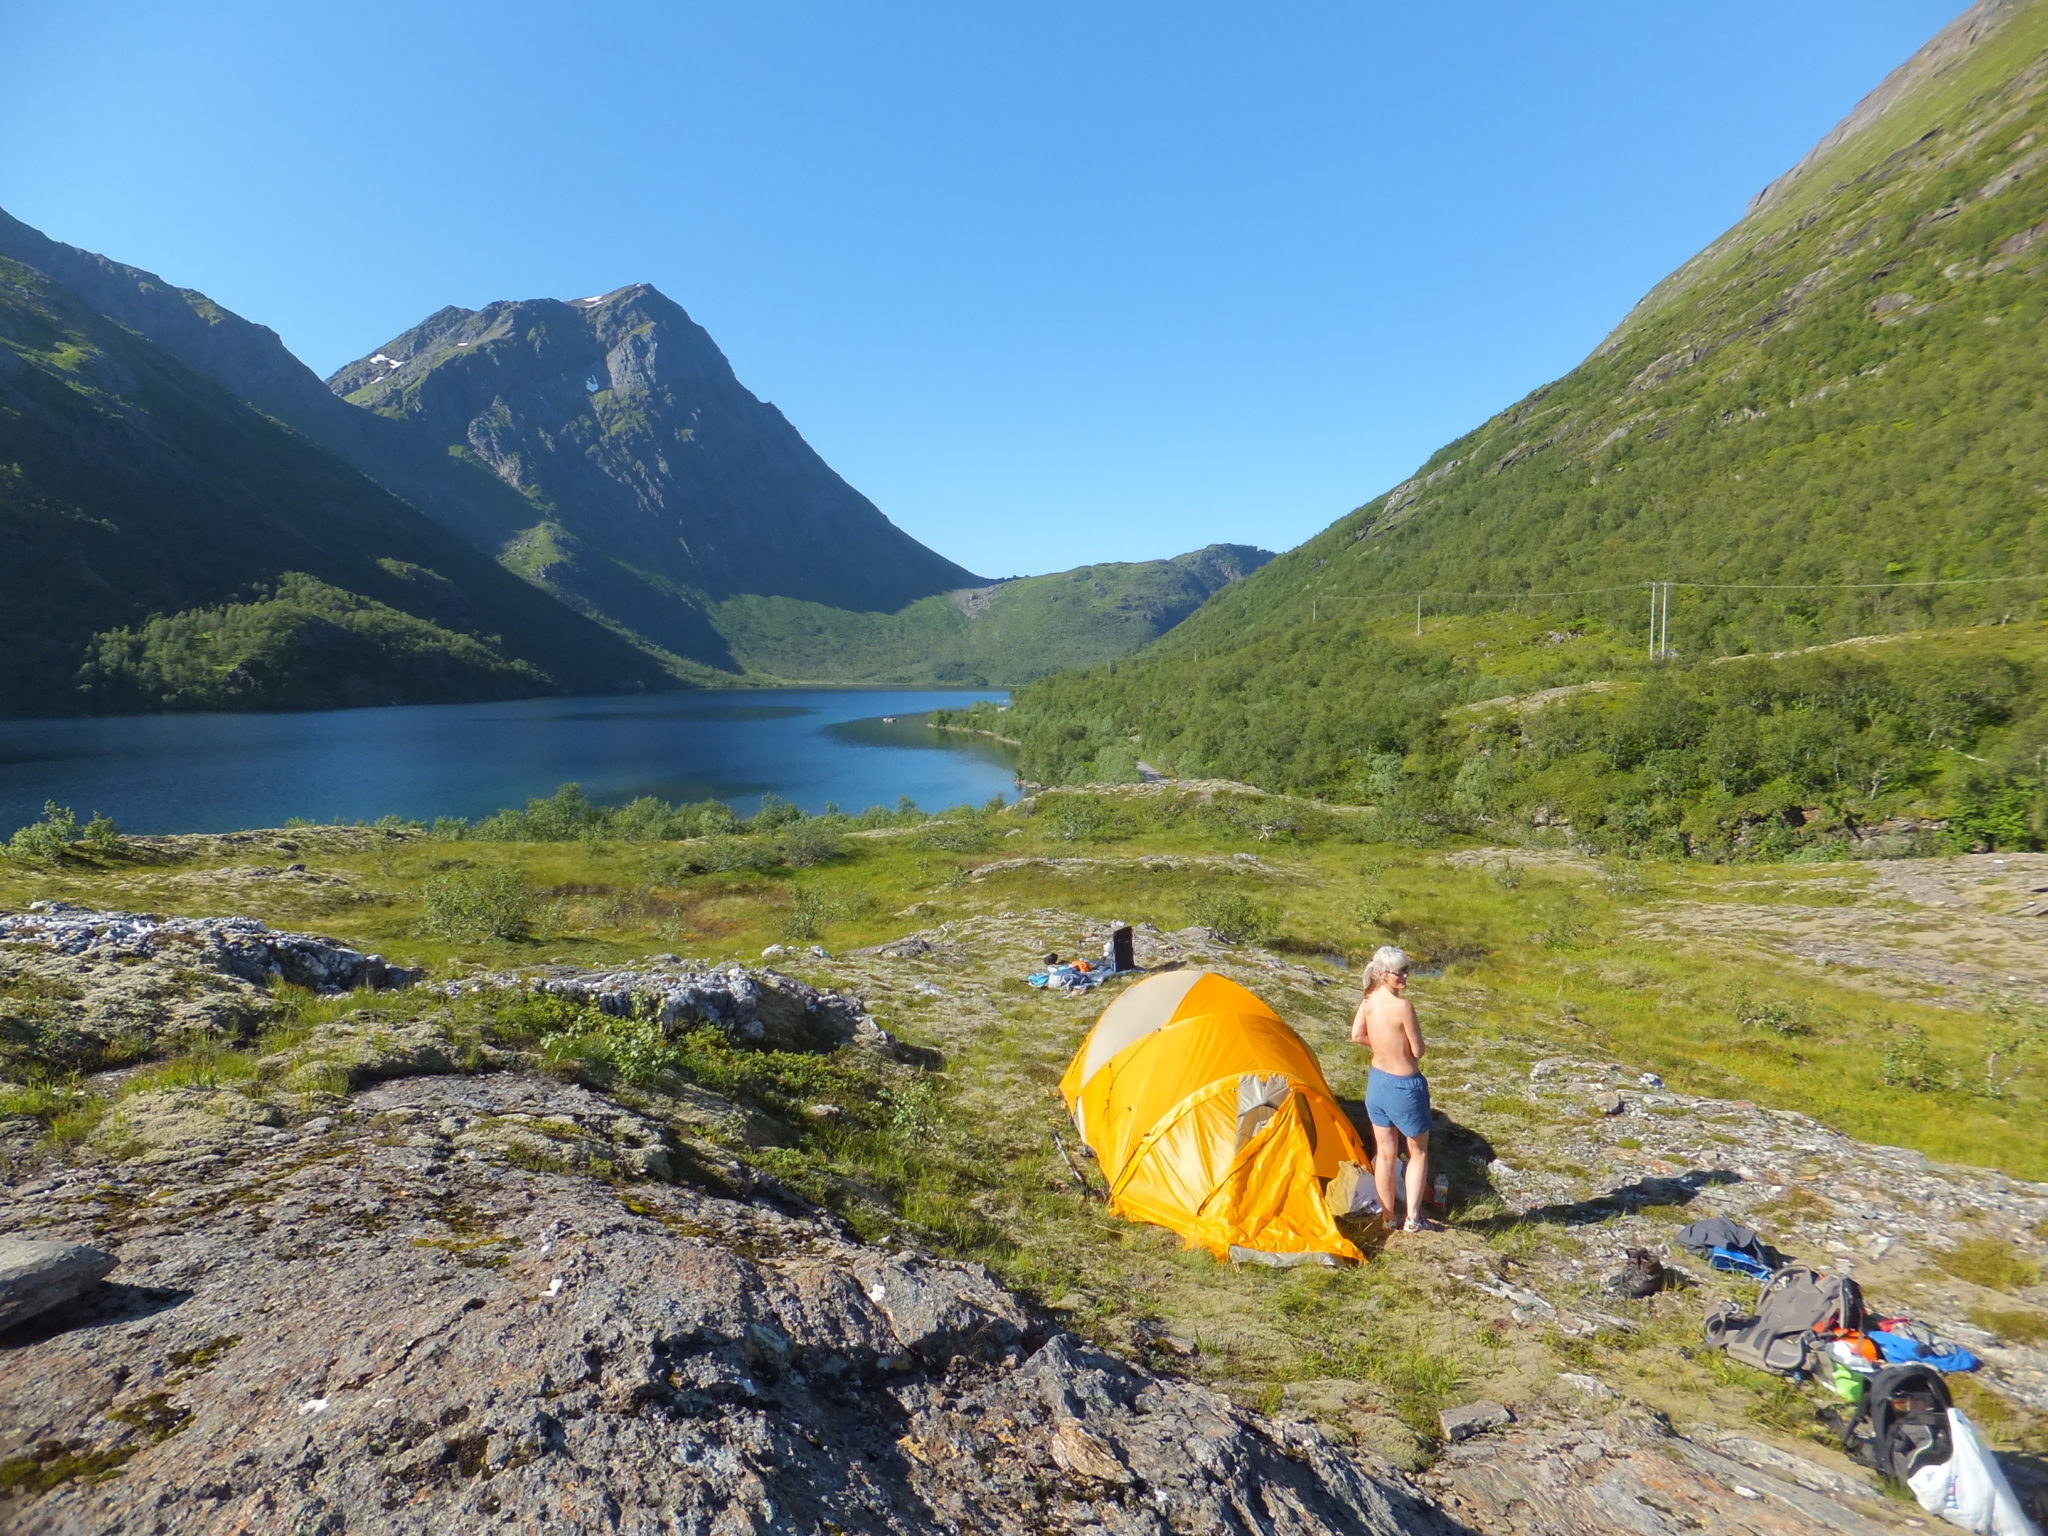 A maximum of 2 nights camping on the same location is allowed © Eirik Alst